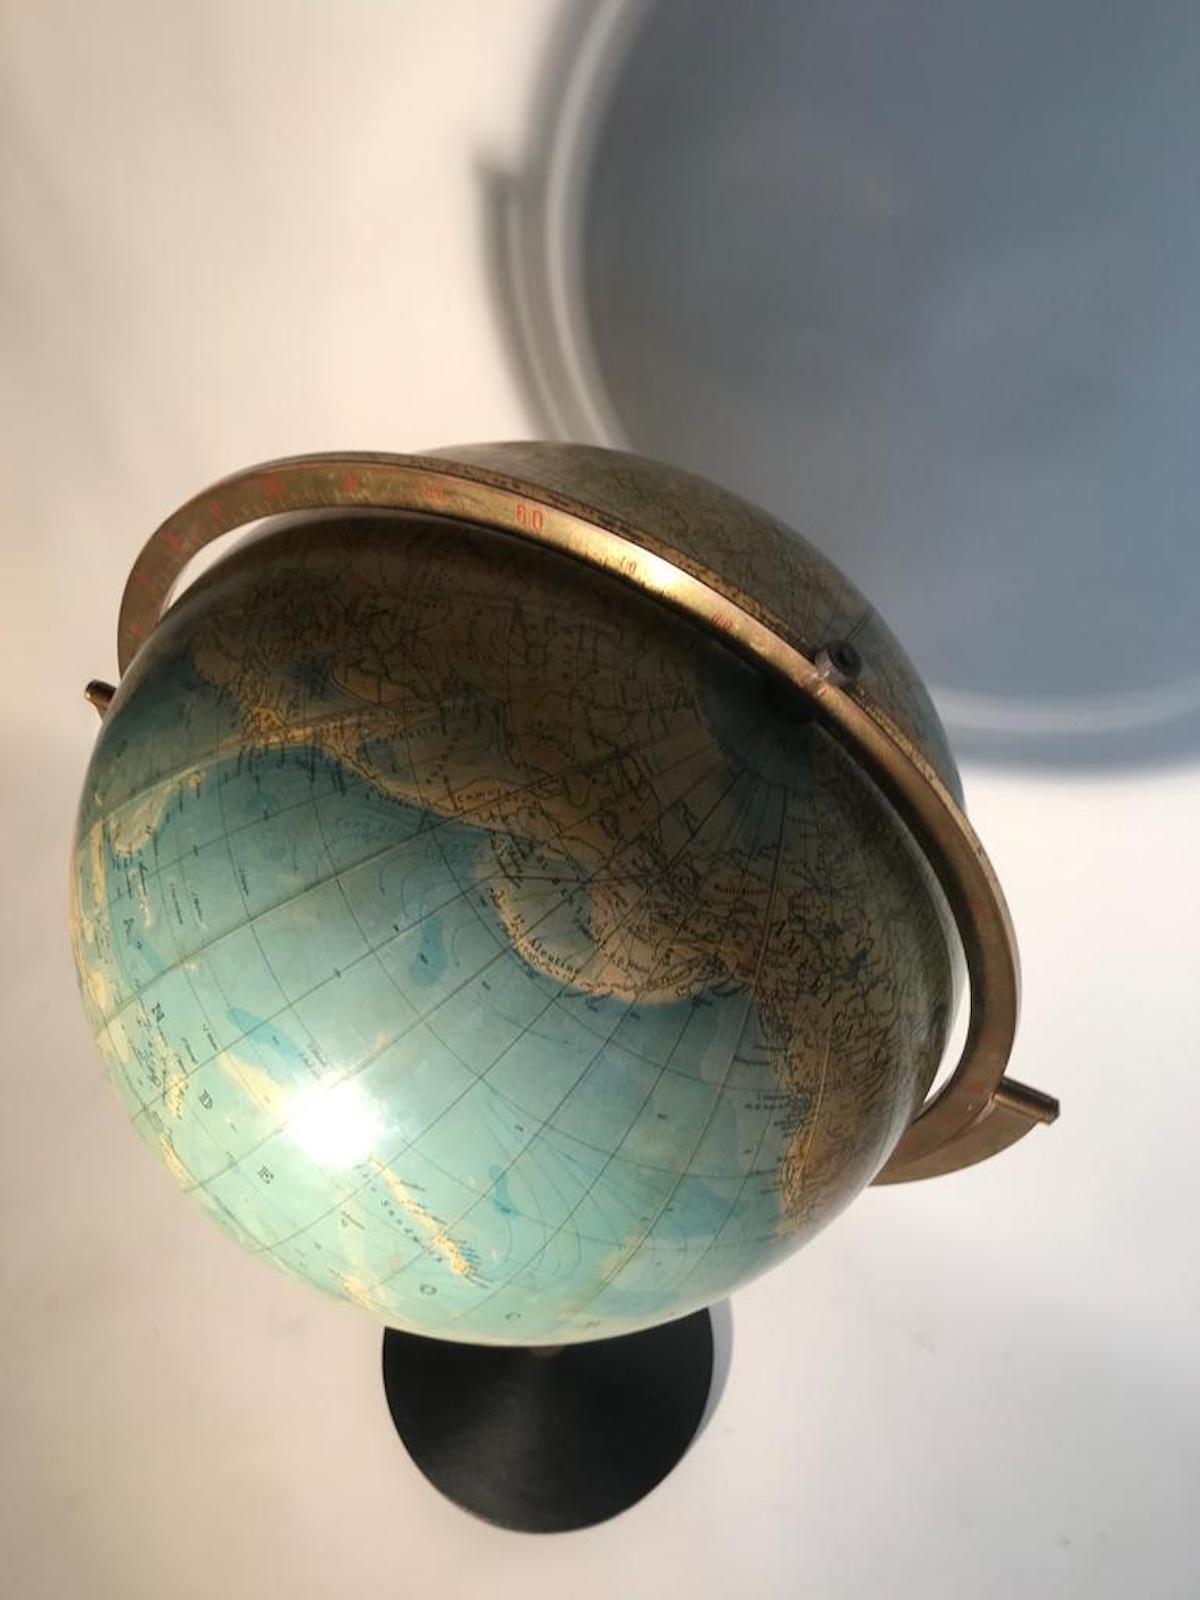 Gorgeous italian floor standing globe made at the end of 40s by the firrm G.B. Paravia & co. based on a design by C.Boehmer. An object of this quality is truly rare. The geographical part is in perfect condition. 
There is some light damage on the